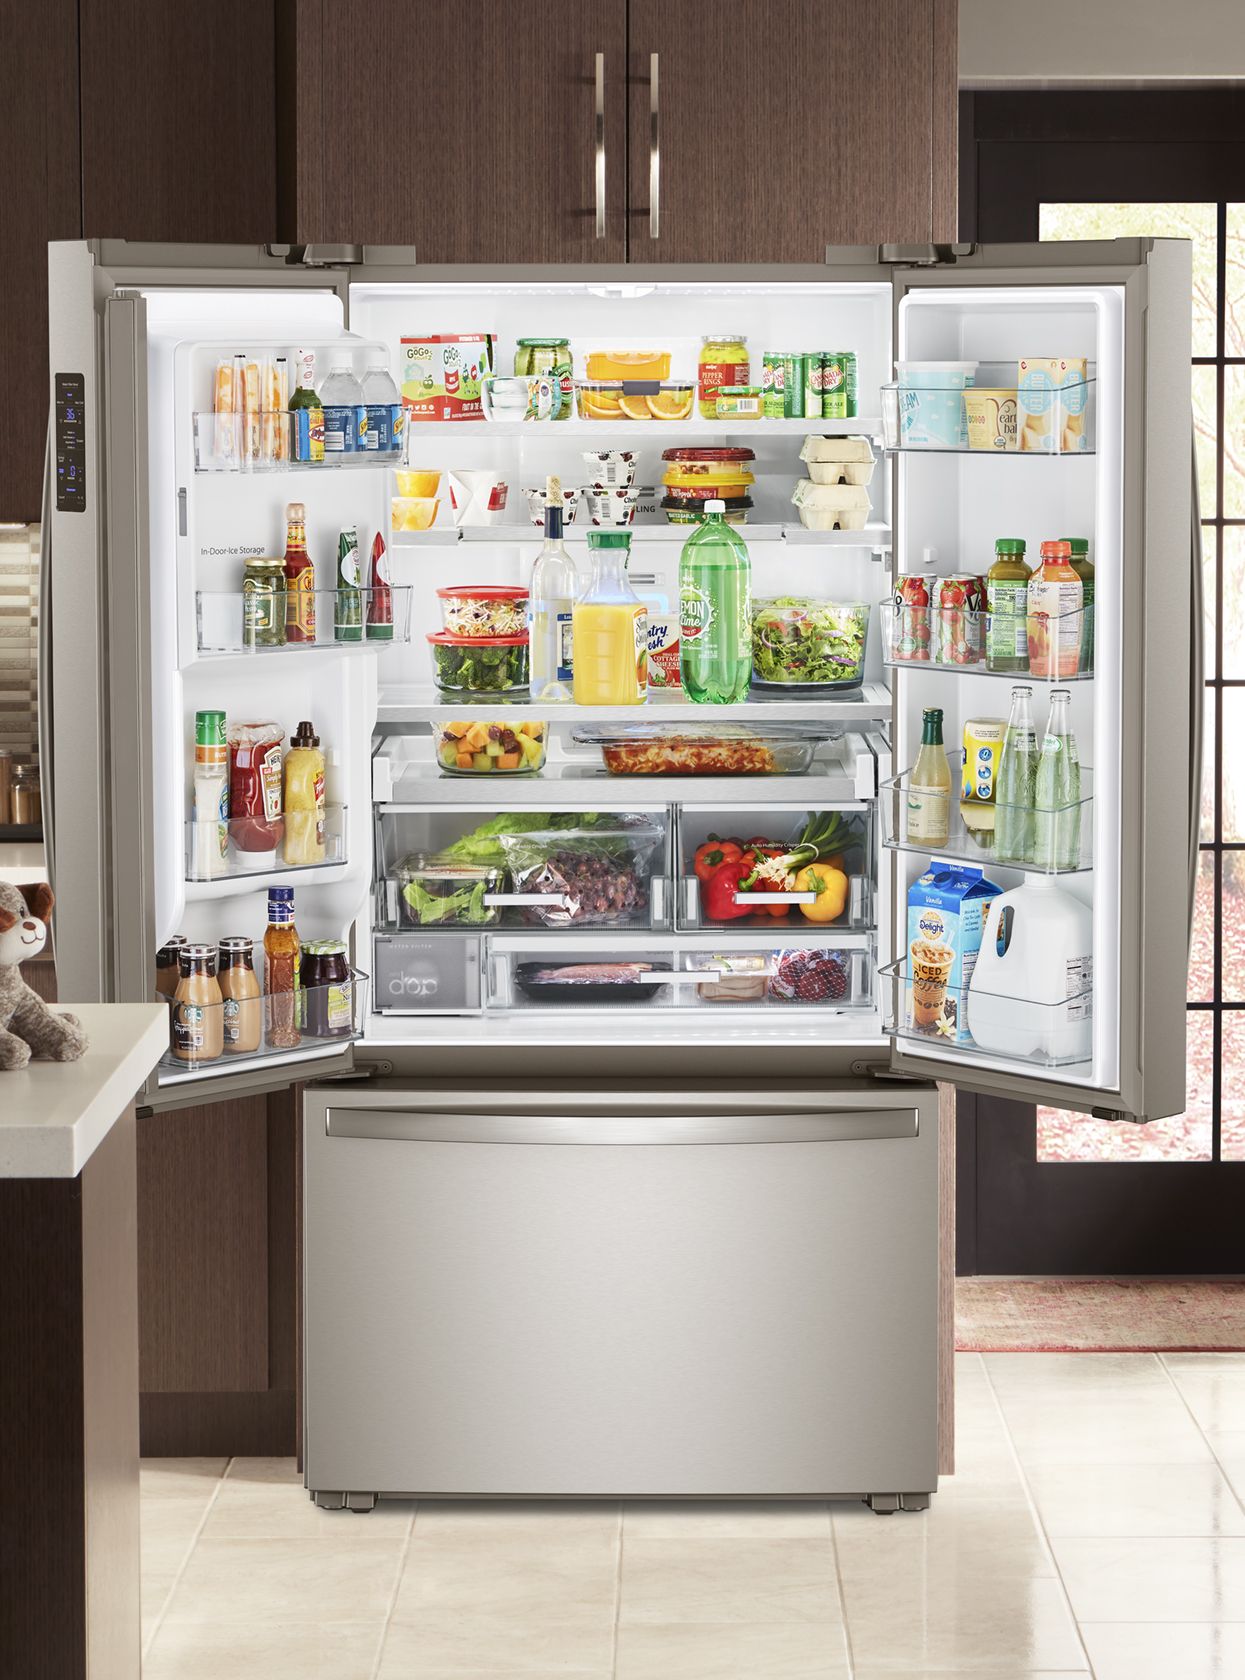 Refrigerator Options For Every Kitchen Whirlpool